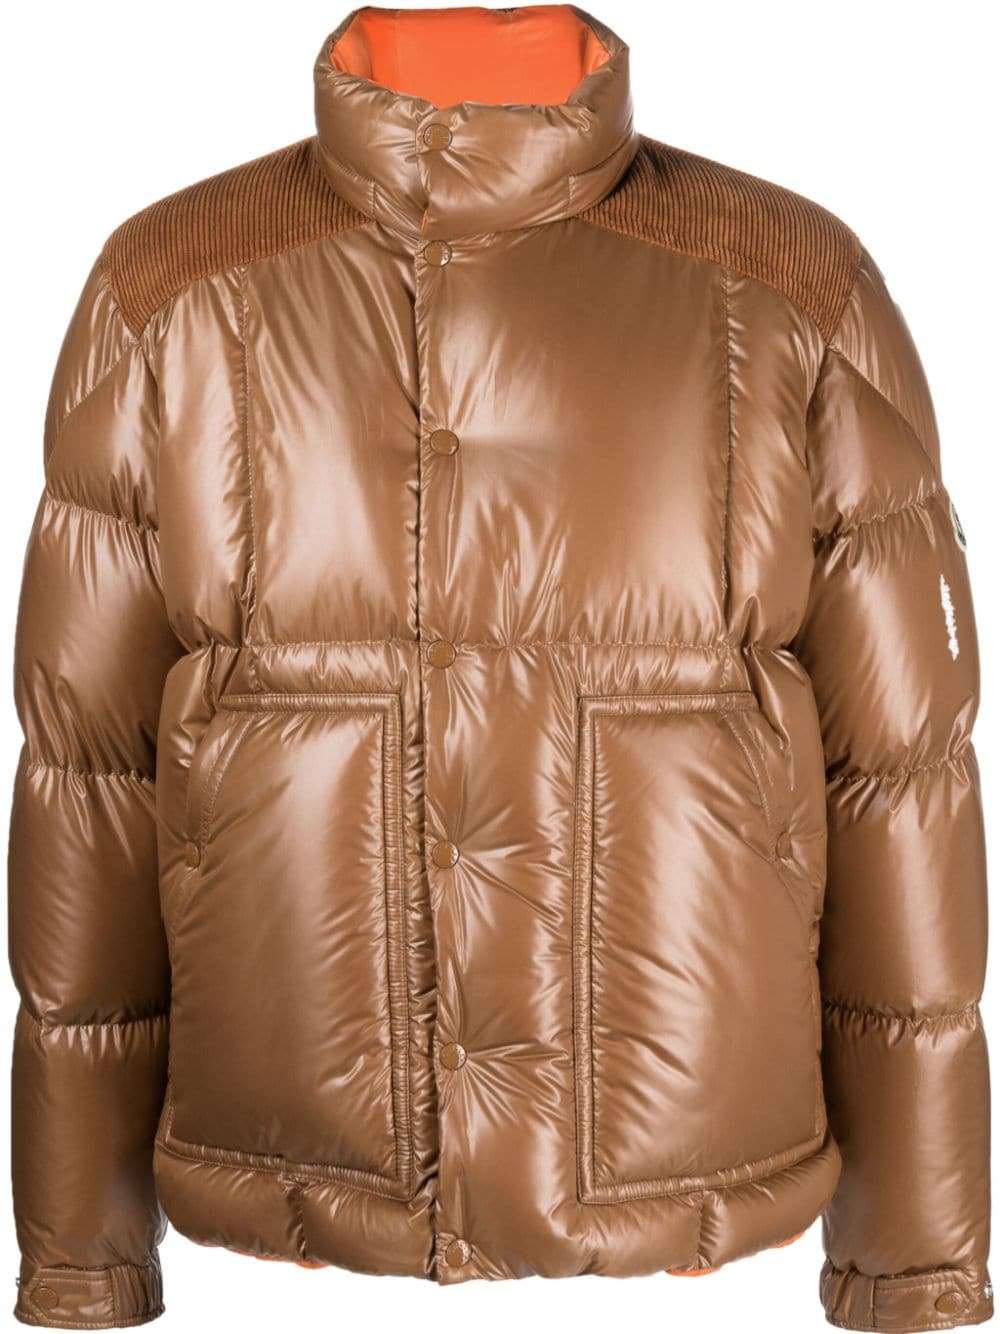 Ain padded down jacket